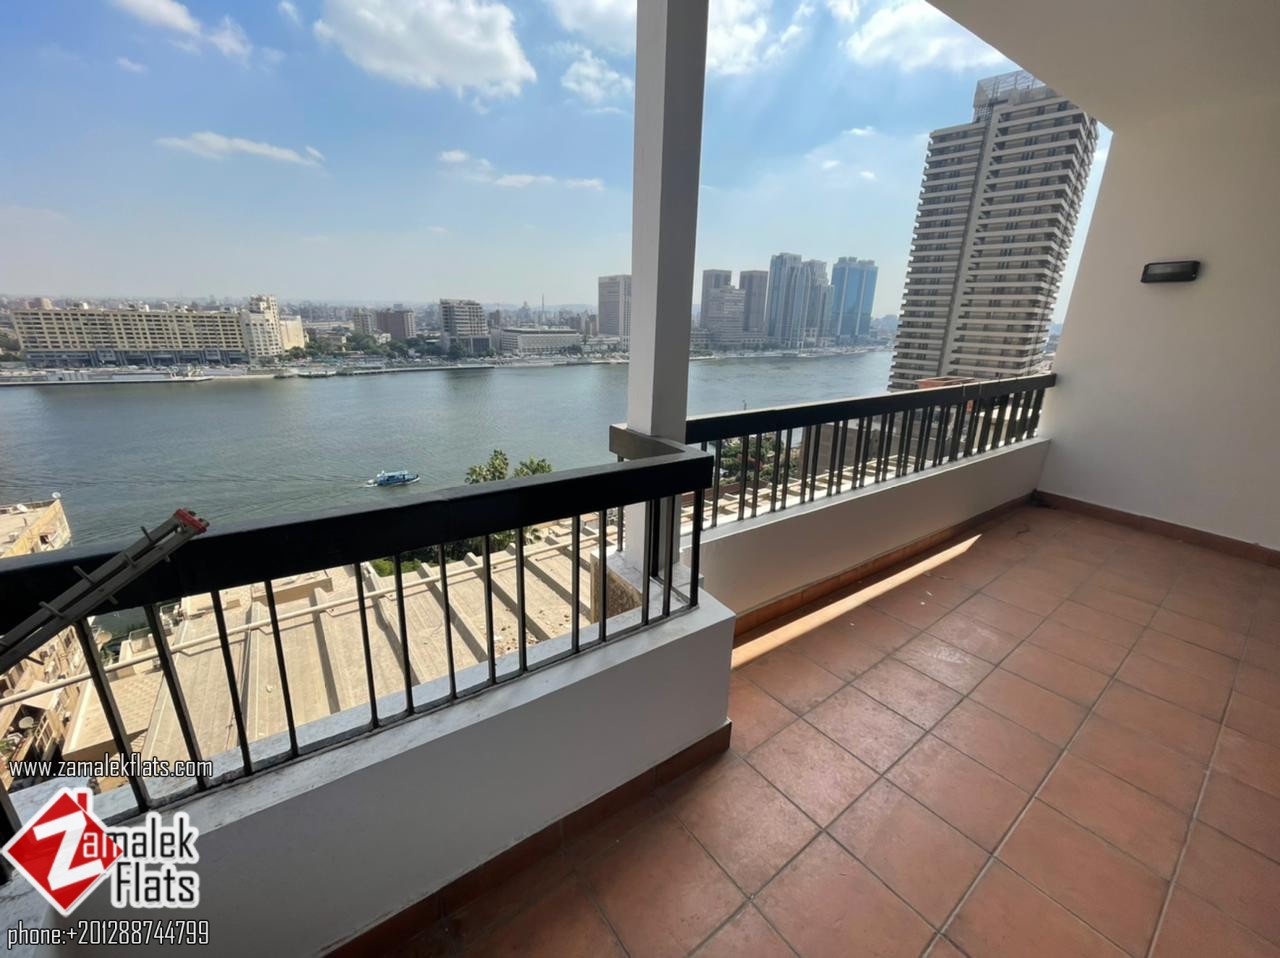 Nile View Apartment for Rent in Zamalek.